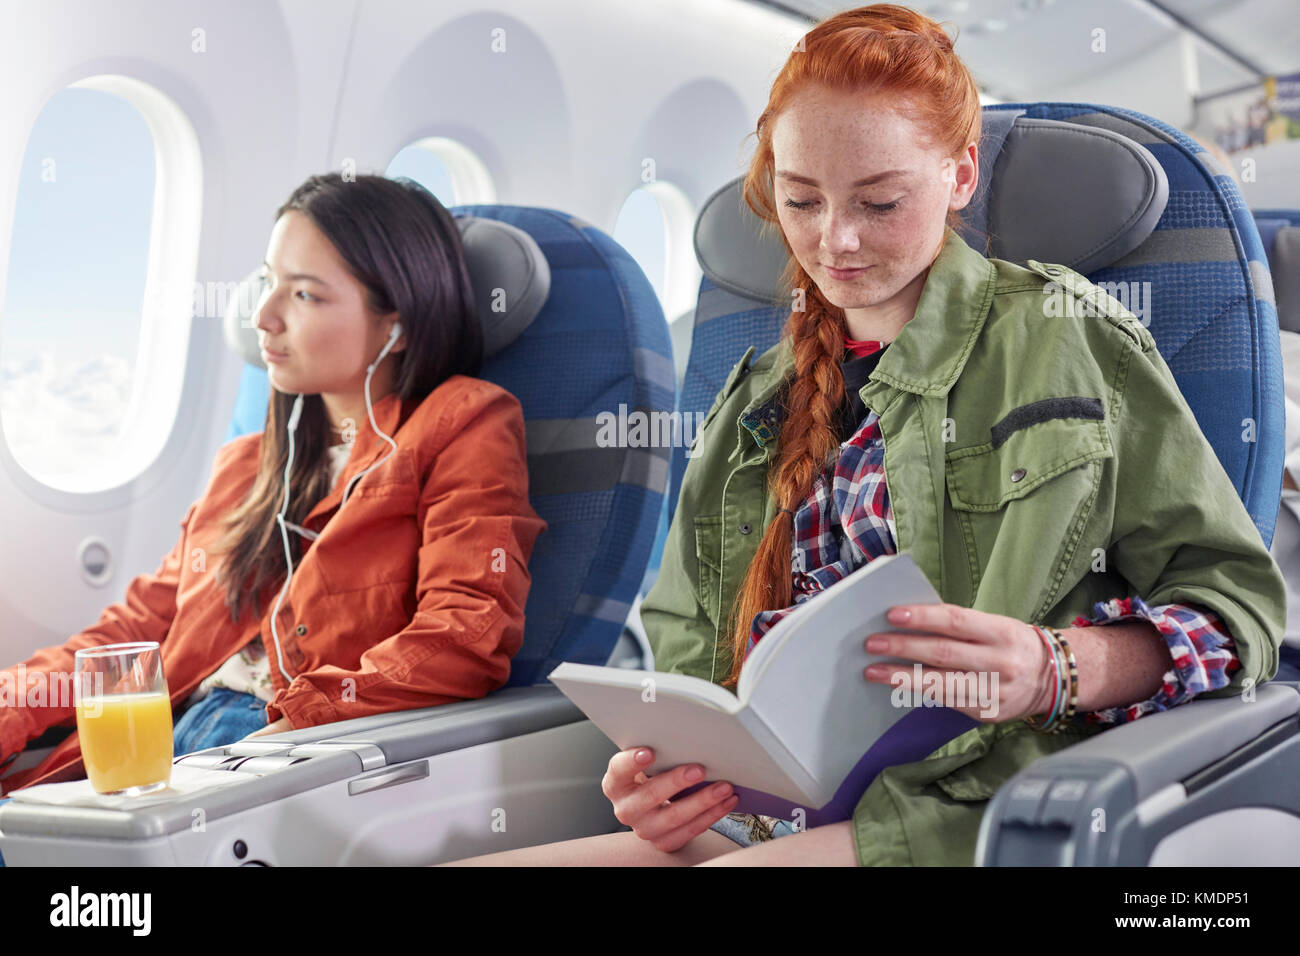 Young woman reading book on airplane Stock Photo